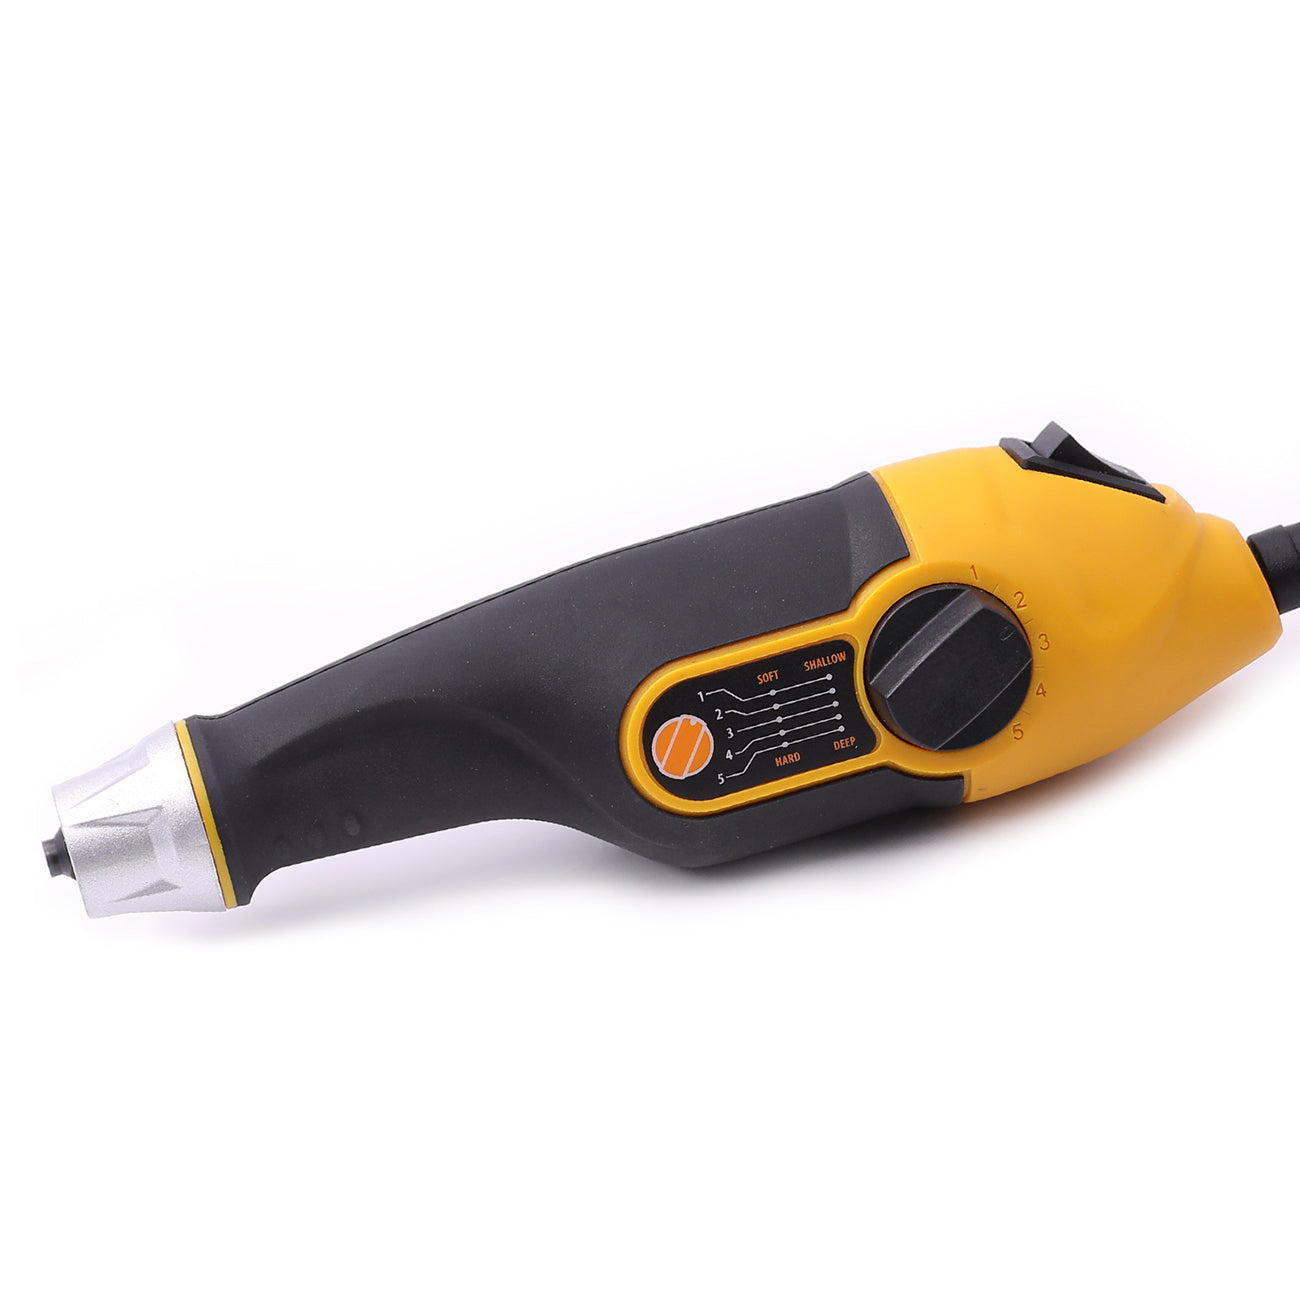 24W Engraving Tool – Utooltech